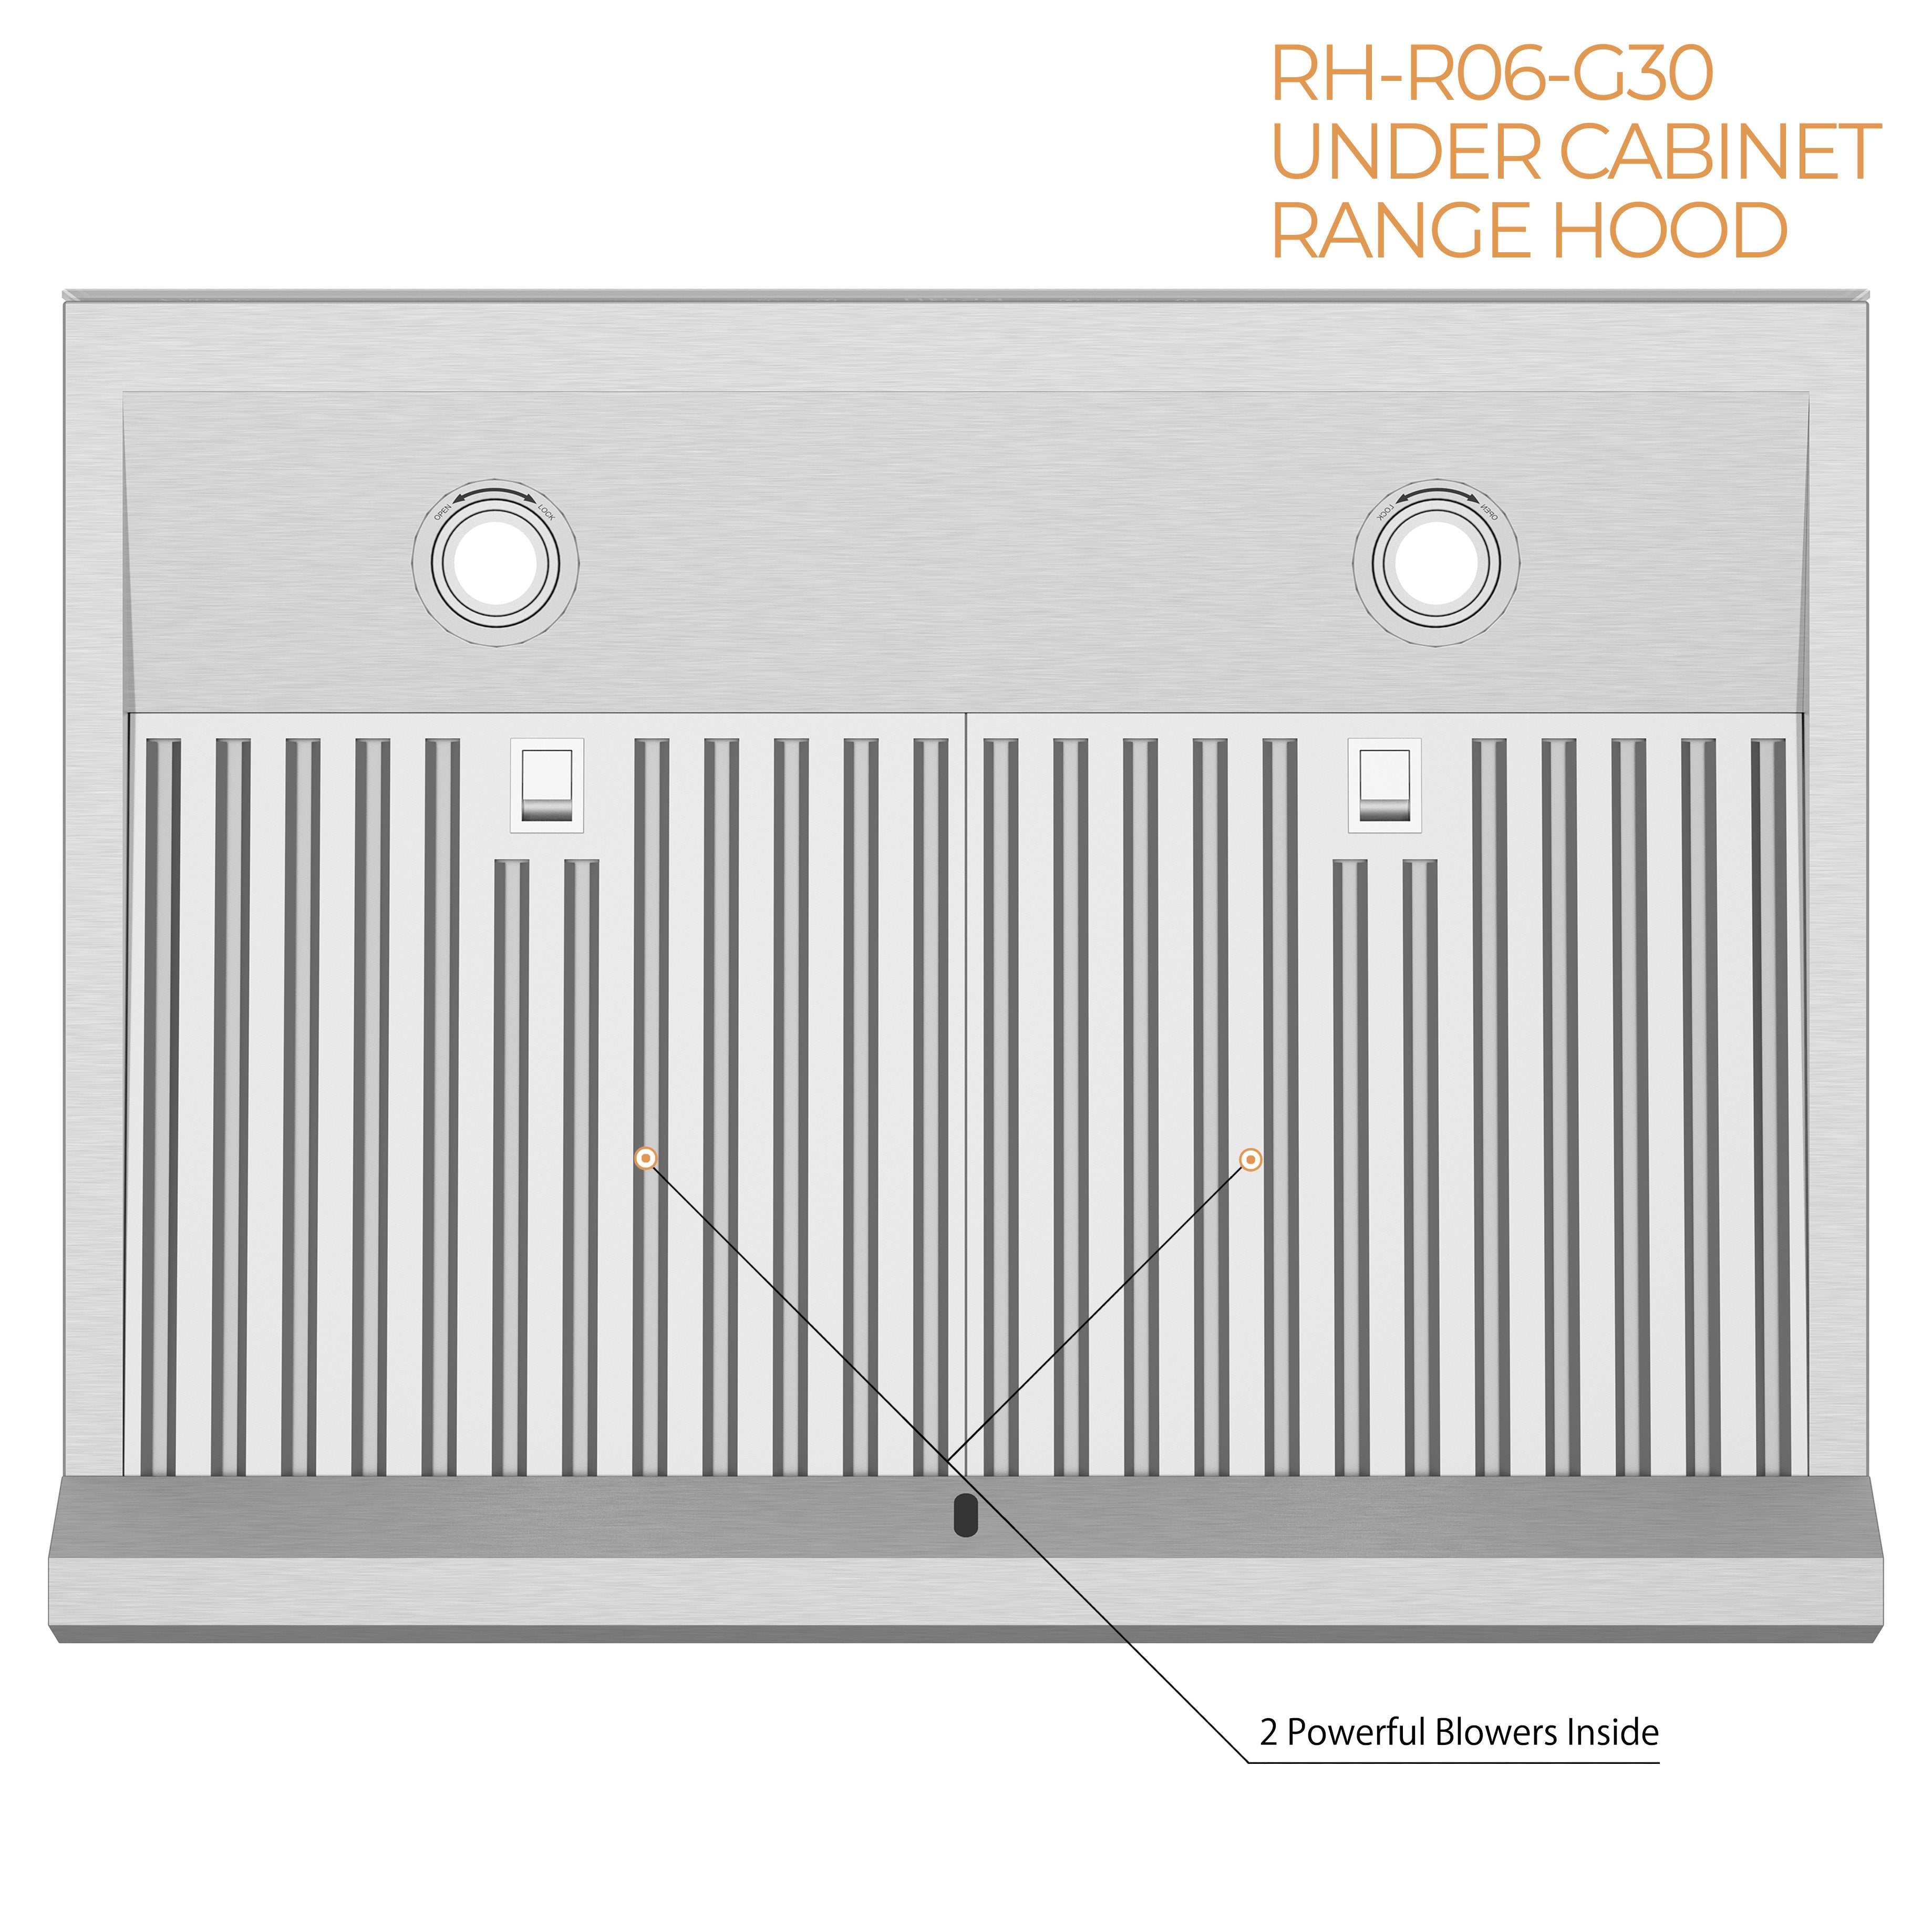 Awoco 30 in. 900 CFM Ducted Under Cabinet Range Hood in Stainless Steel